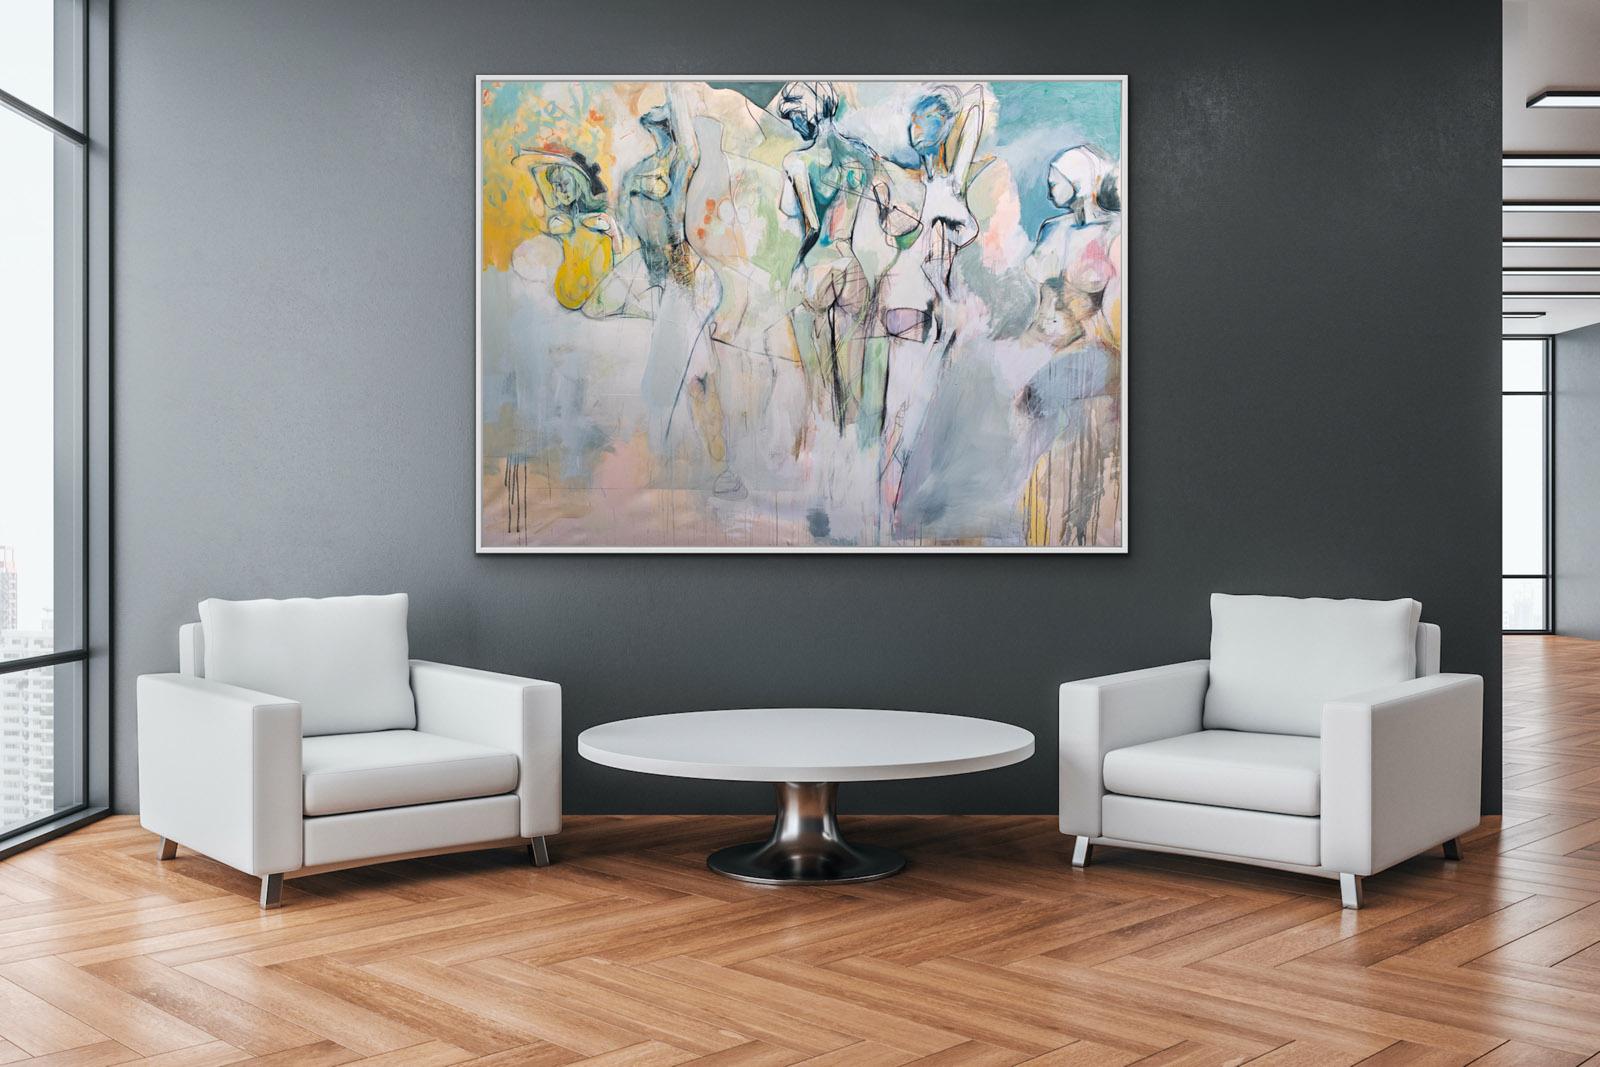 The Four Fates - Gray Figurative Painting by Patrick Collins